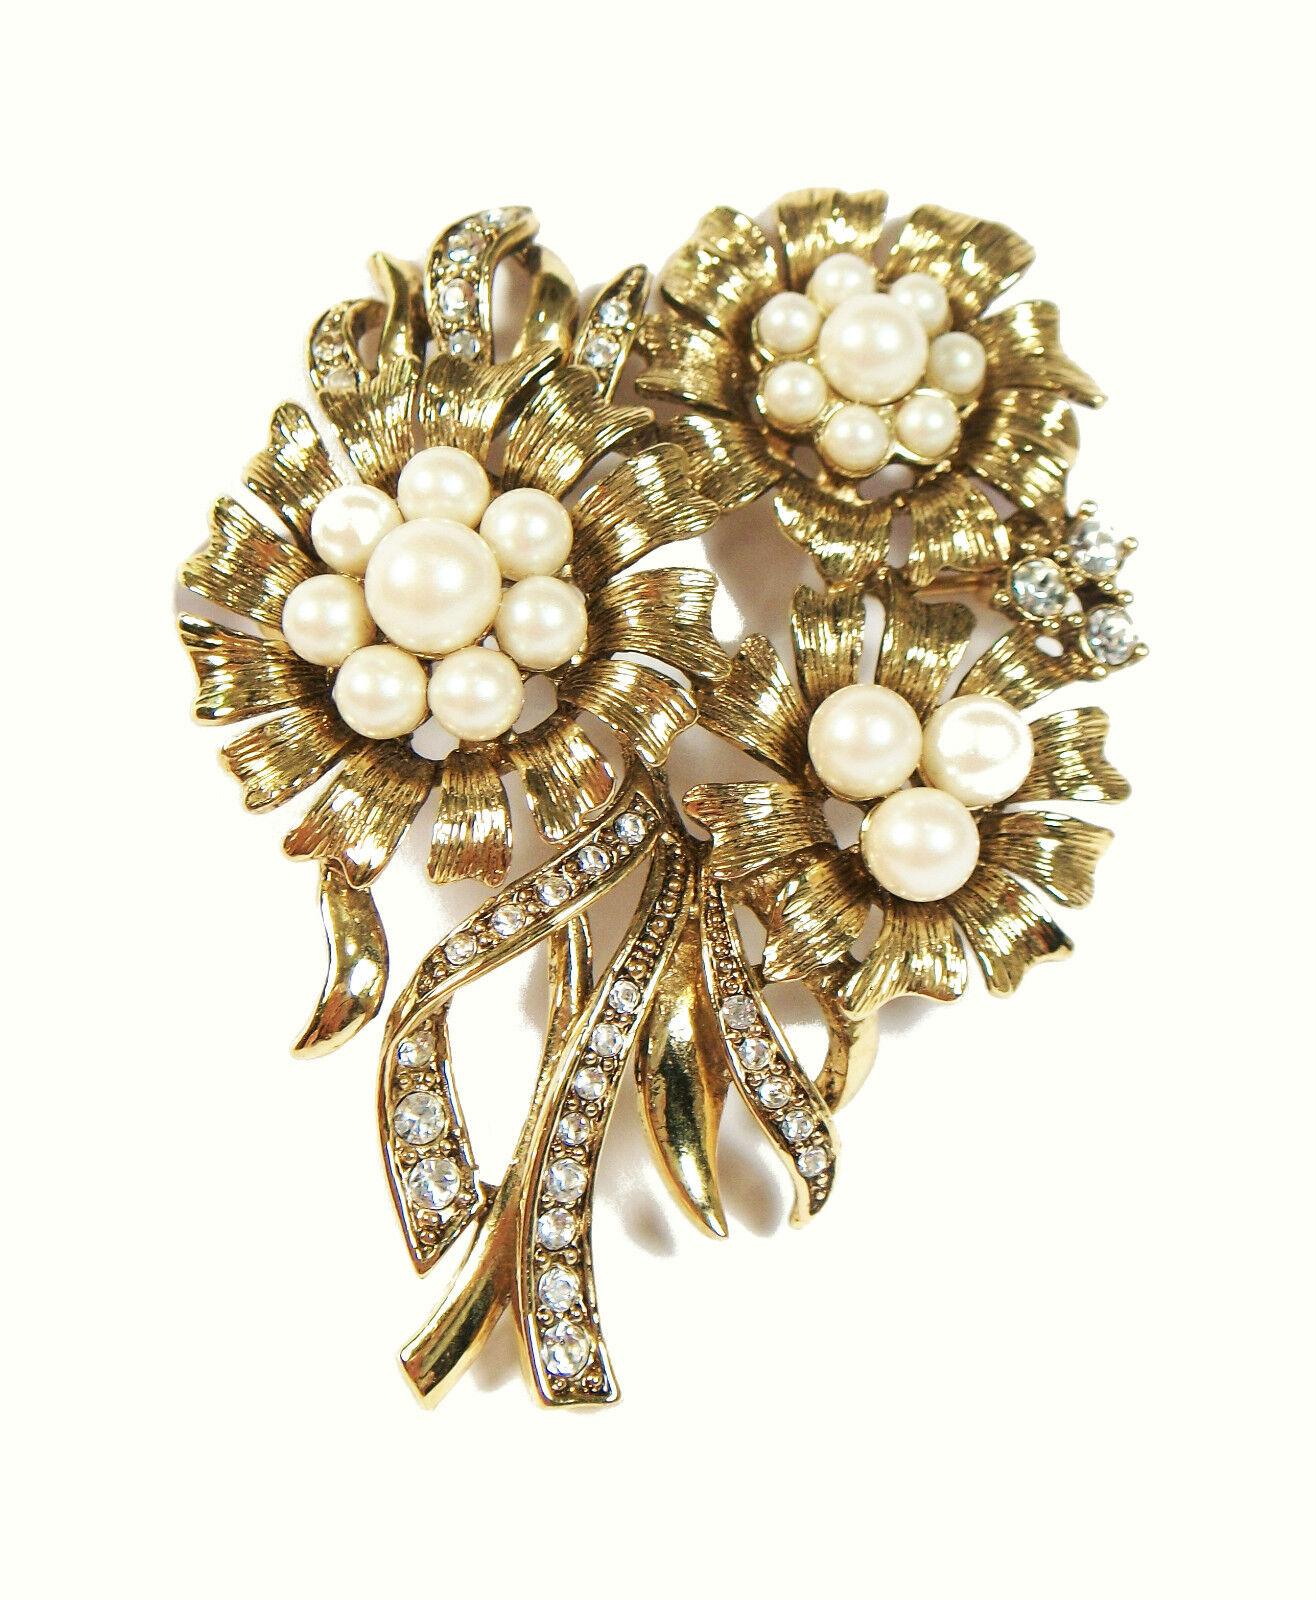 Contemporary MONET - Vintage Flower Brooch with Pearls & Rhinestones - Signed - Circa 1960's For Sale